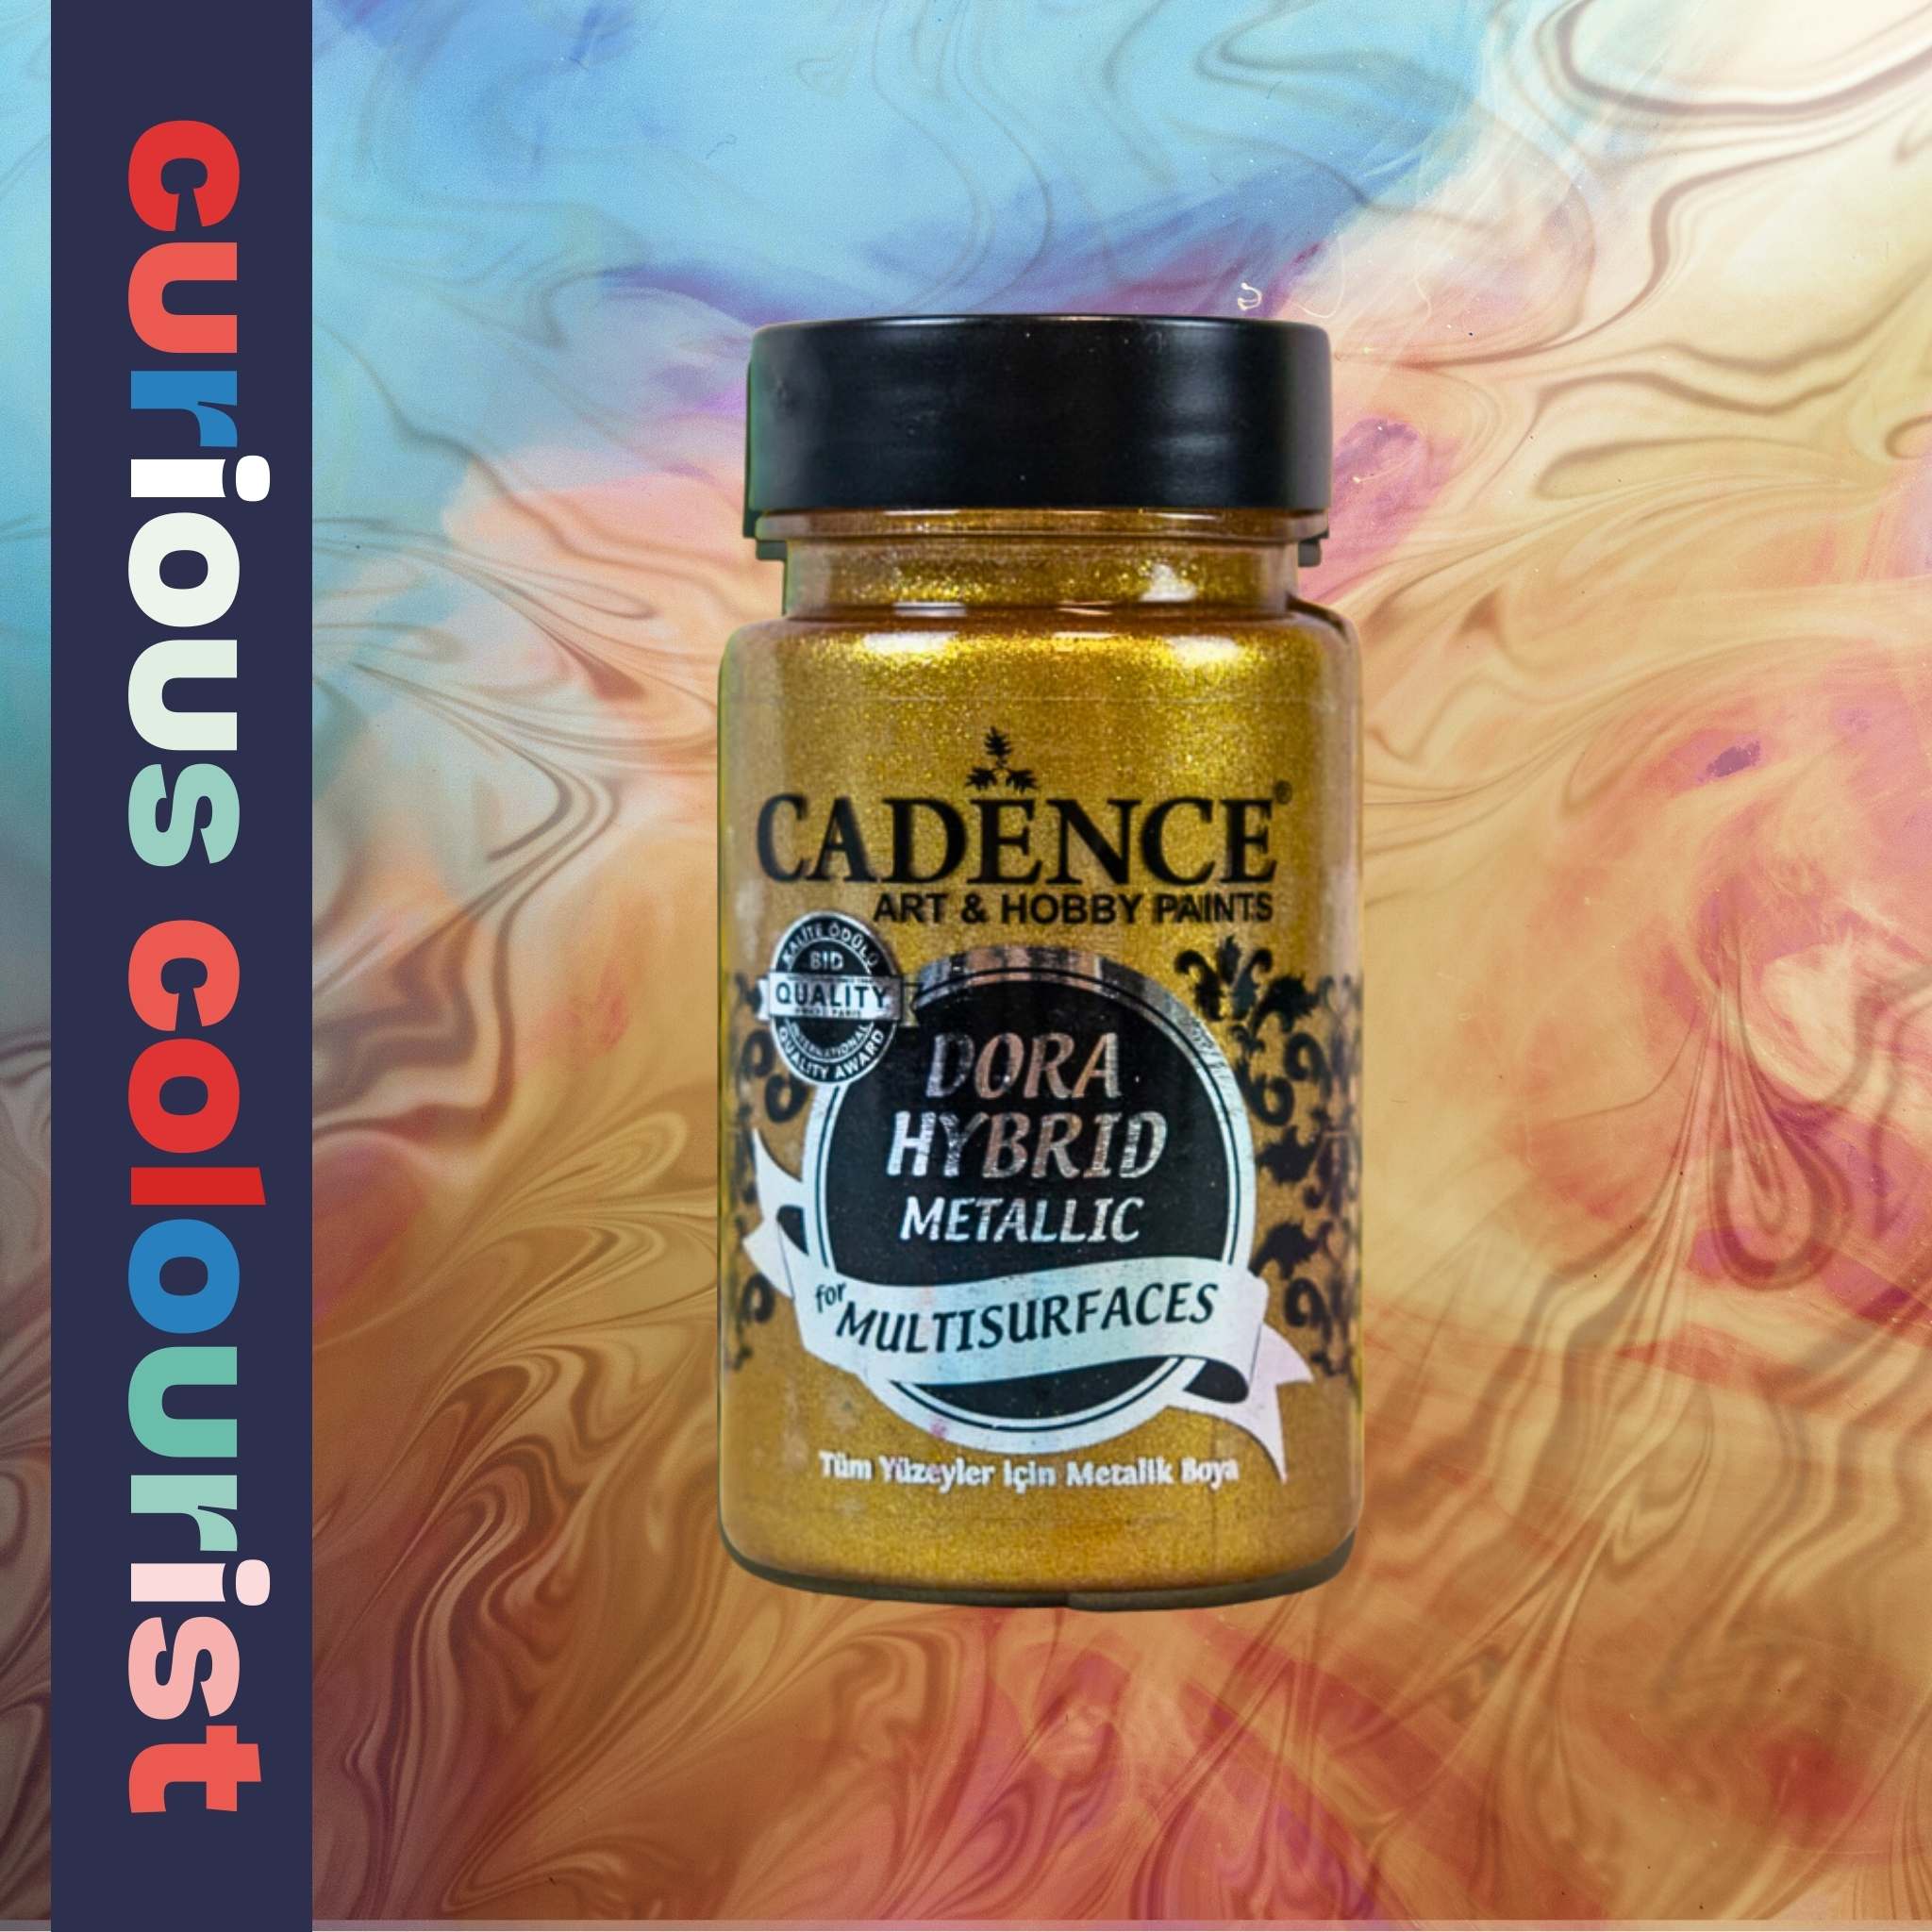 Antique Gold Two tone metallic paint from Cadence that will give your leather craft projects a glitter and shine - use to as paint effects, re-colour or personalise your leather shoes or bags.